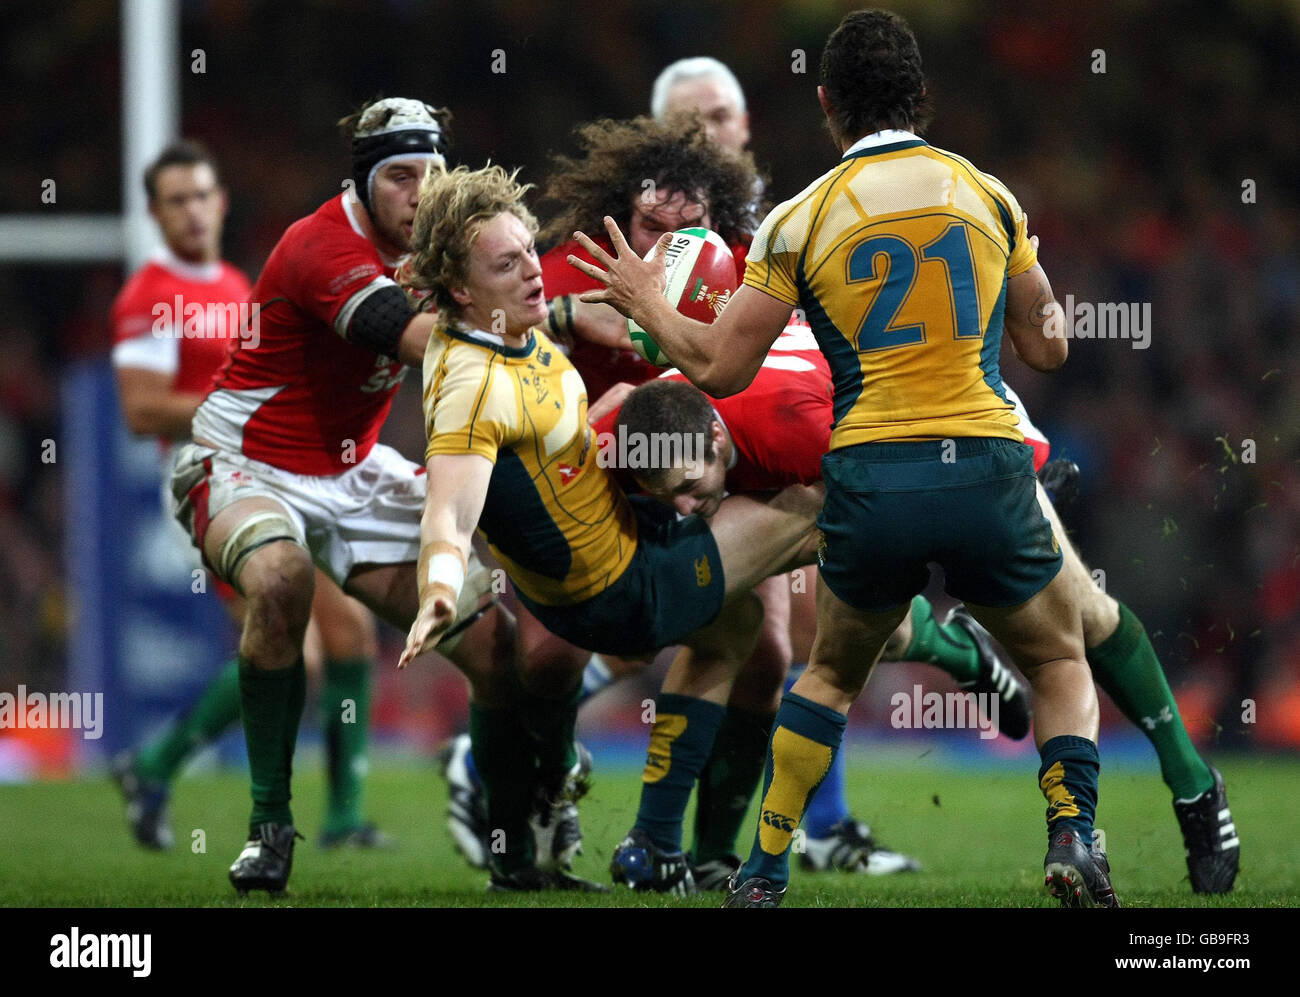 Australia's Ryan Cross offloads the ball under pressure from Wales' Andrew Bishop during the Invesco Perpetual Series match at the Millennium Stadium, Cardiff. Stock Photo